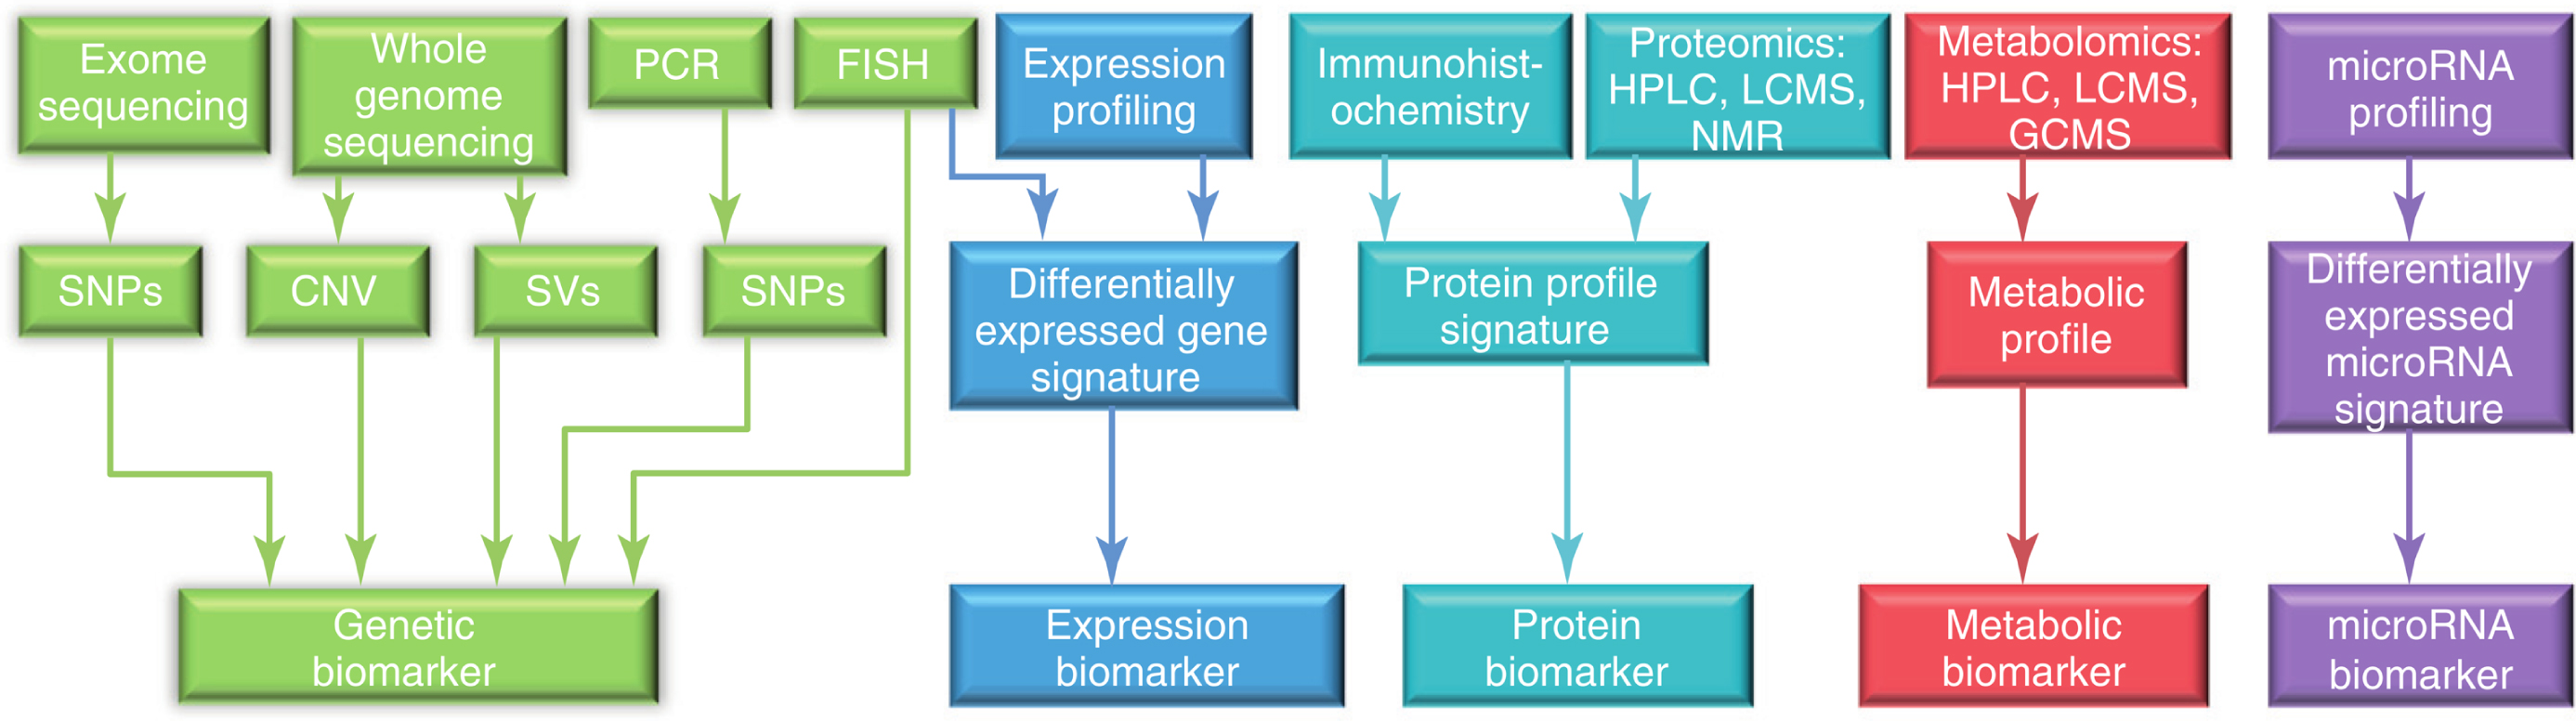 Overview of the currently available technologies and the resulting biological marker categories used for biomarker discovery in preclinical and clinical research. CNV, copy number variations; FISH, fluorescence in situ hybridization; GCMS, gas chromatography mass spectrometry; HPLC, high-performance liquid chromatography; LCMS, liquid chromatography– mass spectrometry; NMR, nuclear magnetic resonance; PCR, polymerase chain reaction; SNPs, single nucleotide polymorphisms; SVs, structural variations. Reproduced with permission from [79].